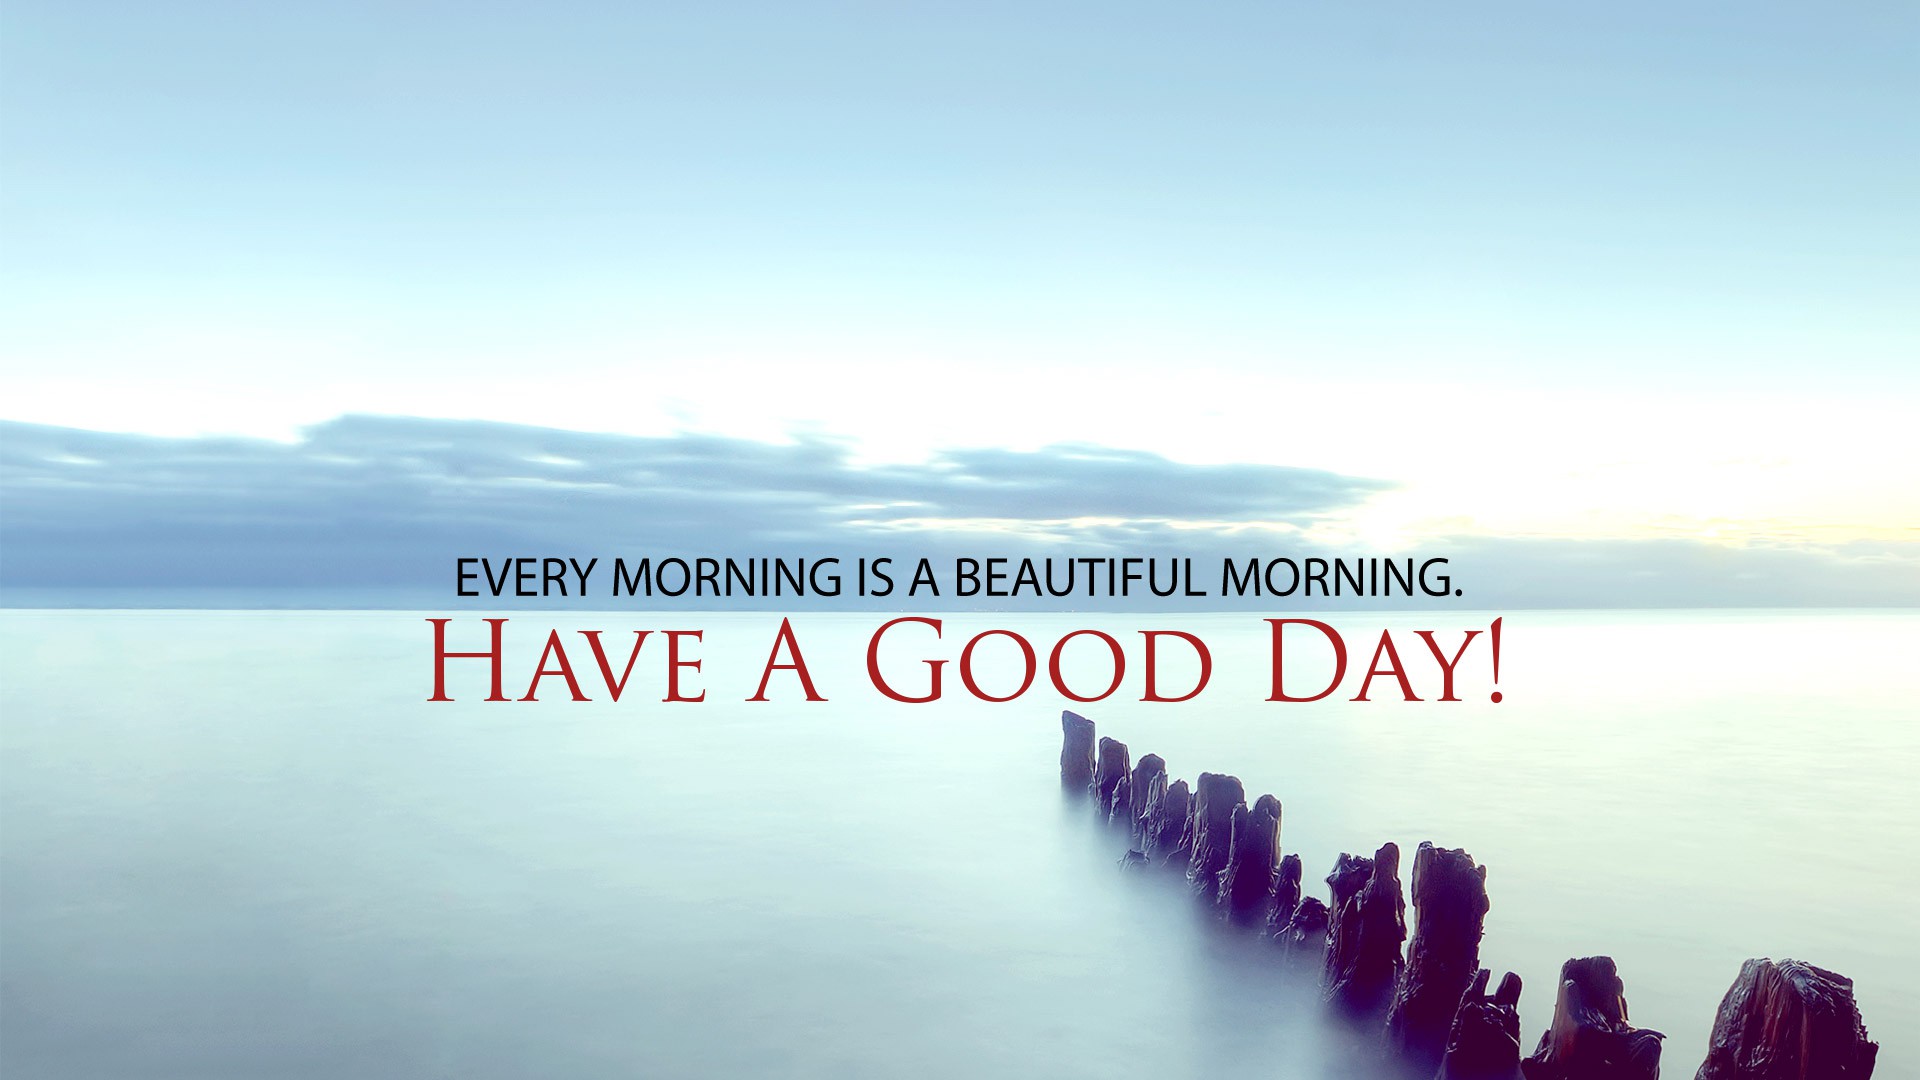 Good Day Quotes HD Wallpaper New